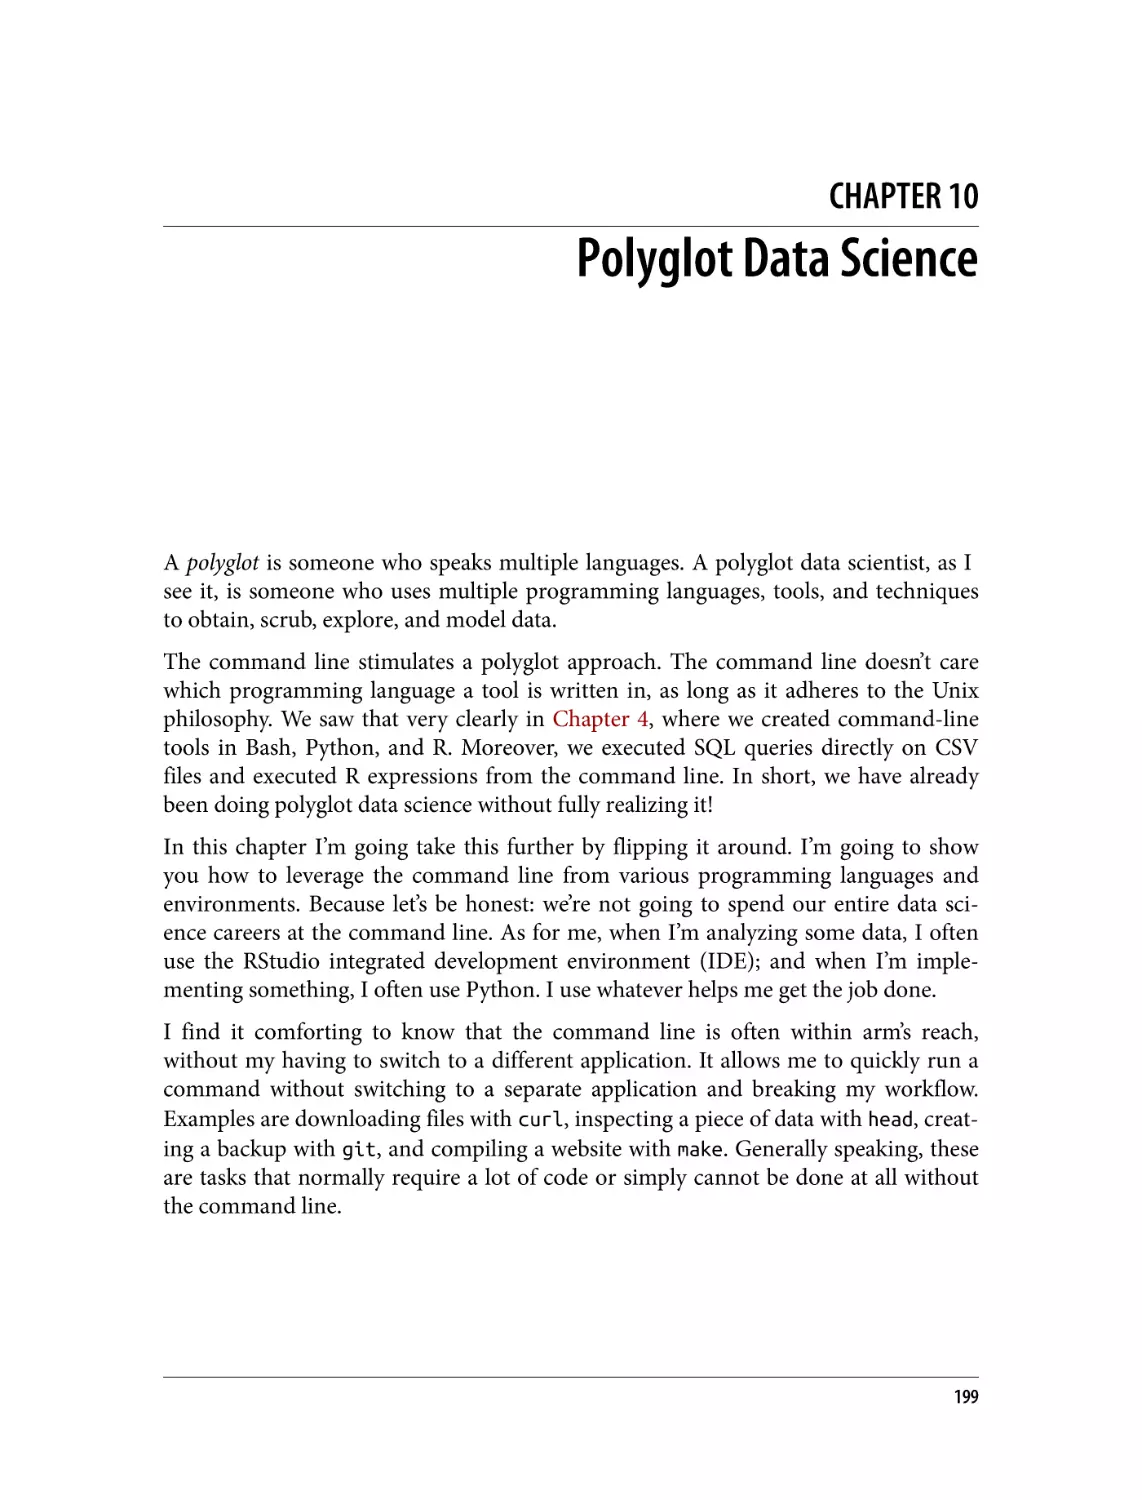 Chapter 10. Polyglot Data Science